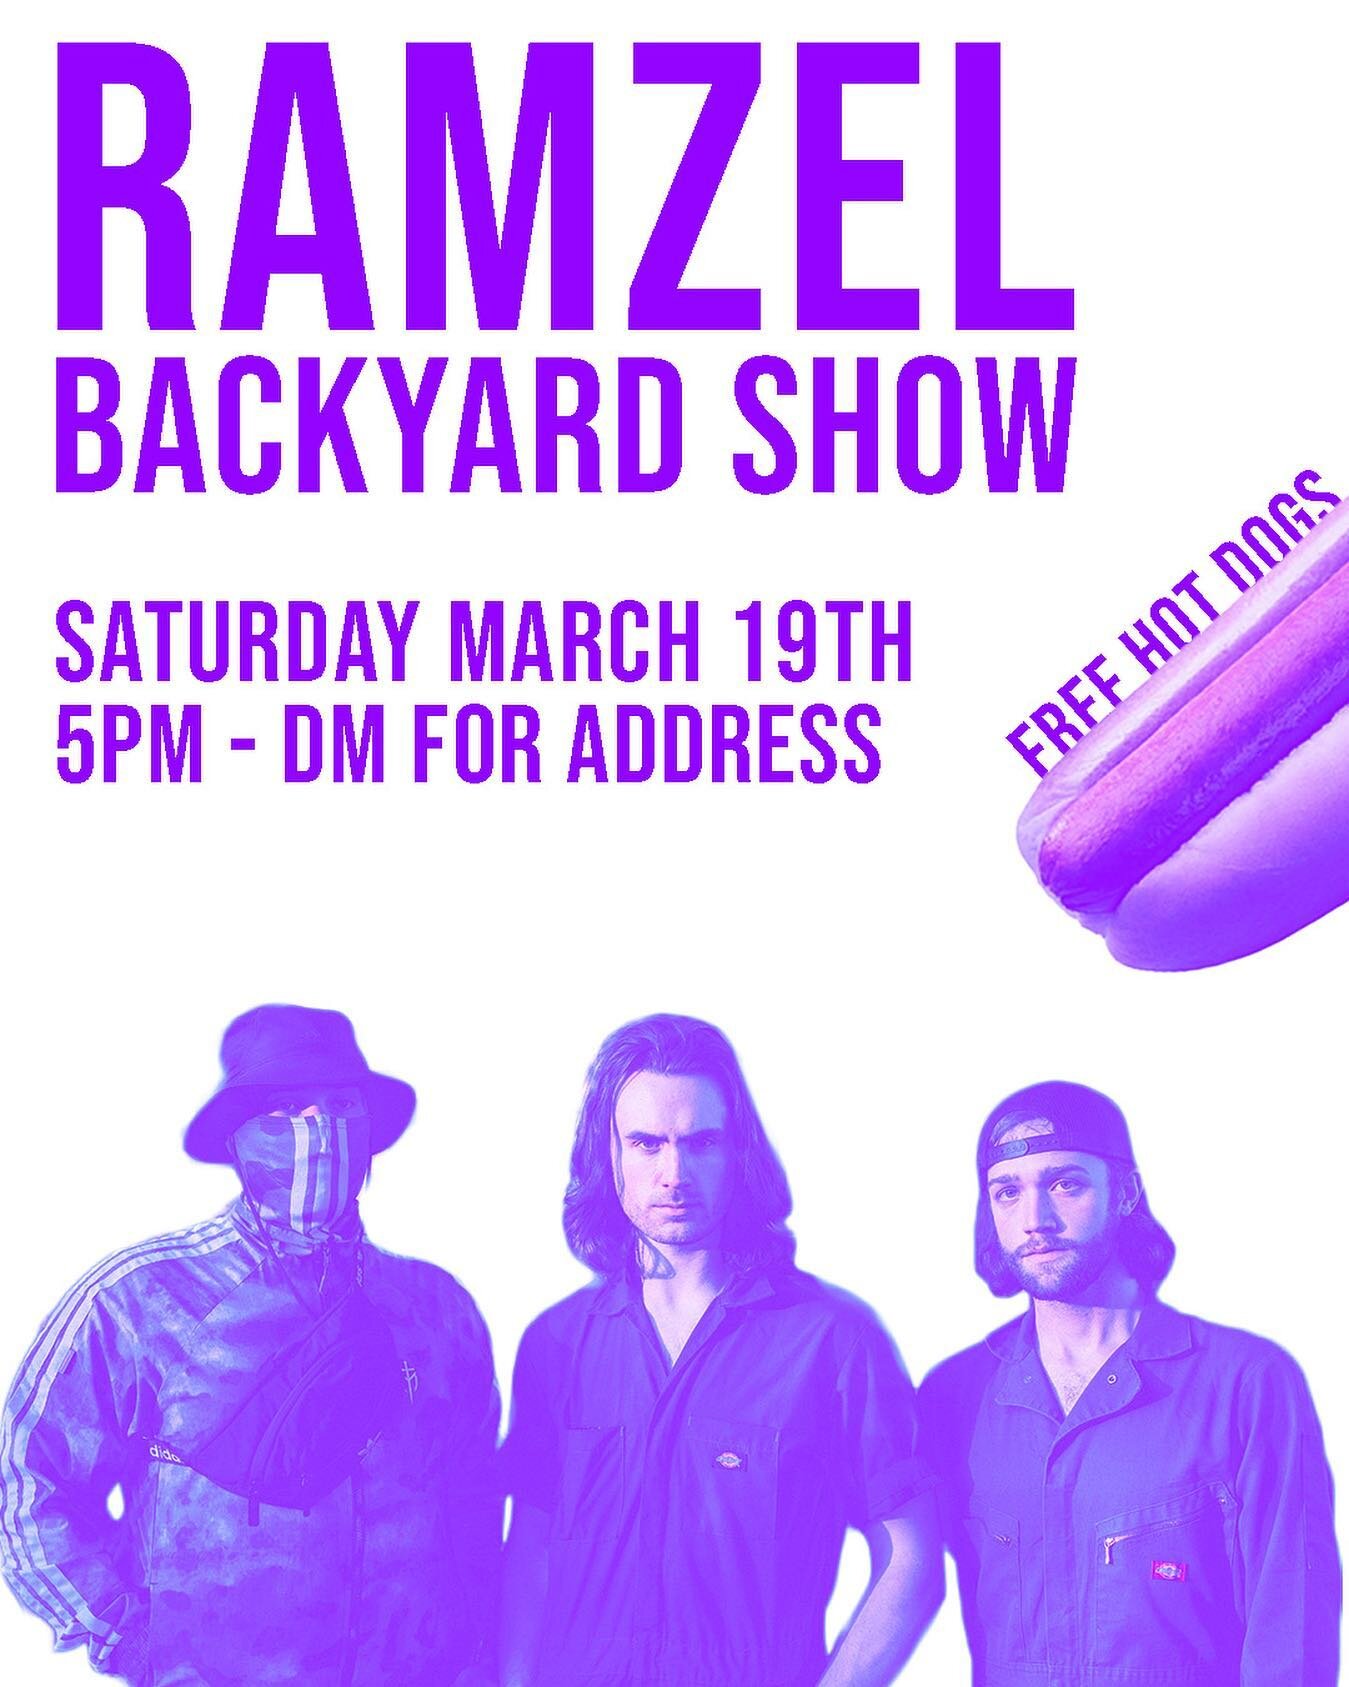 The Official Unofficial SXSW Ramzel Backyard Show is THIS SATURDAY at 5pm! New songs, hot dogs, and nothing but good vibes. ⁣Bring some friends and let&rsquo;s celebrate life!
⁣
As a wise man once said, ⁣
⁣
&ldquo;Come hungry, leave happy.&rdquo;